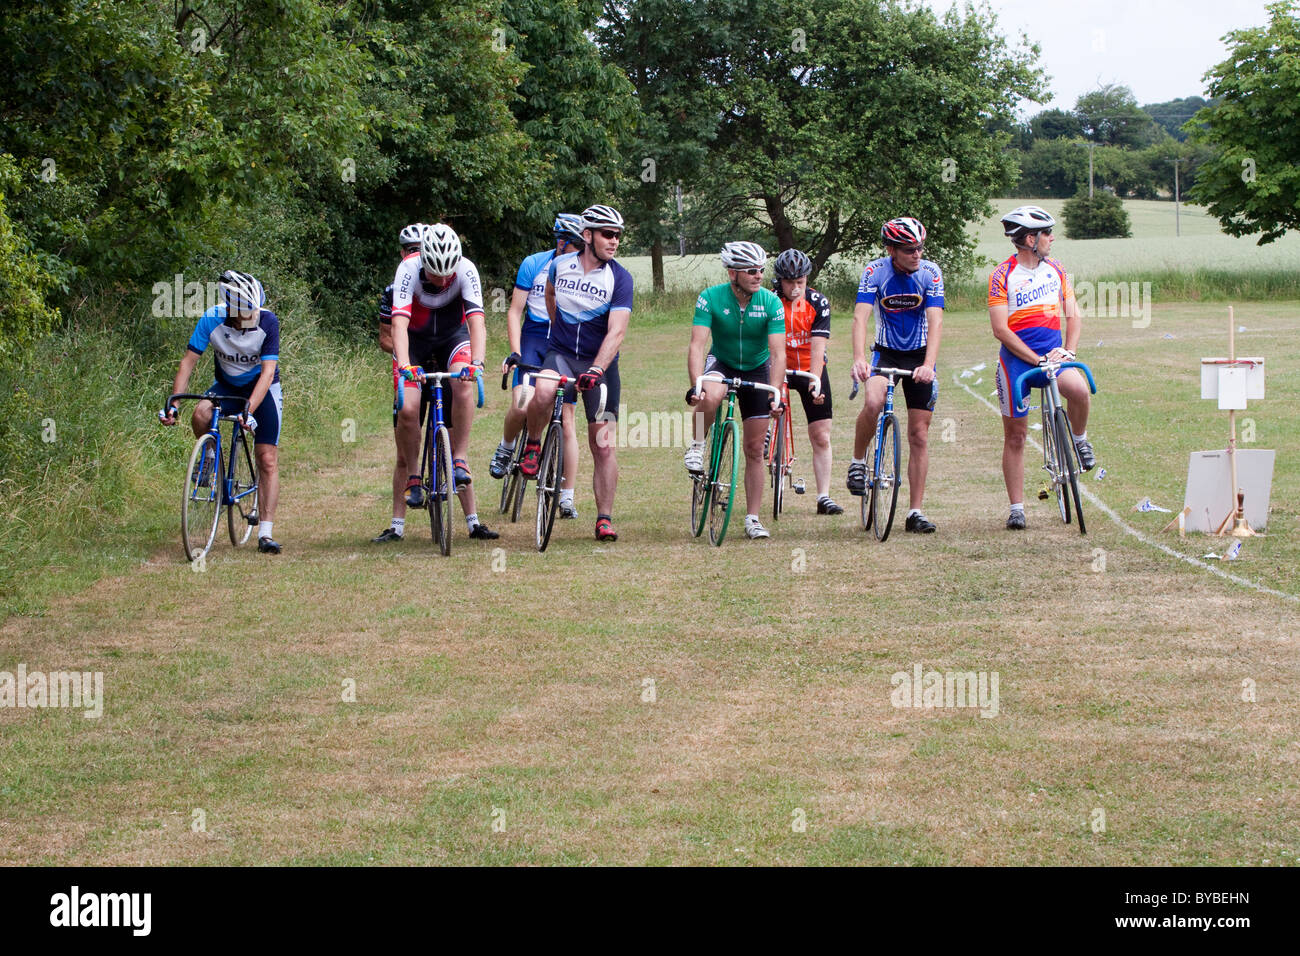 Cyclists line up at the start of a grass track race in rural Suffolk. Stock Photo